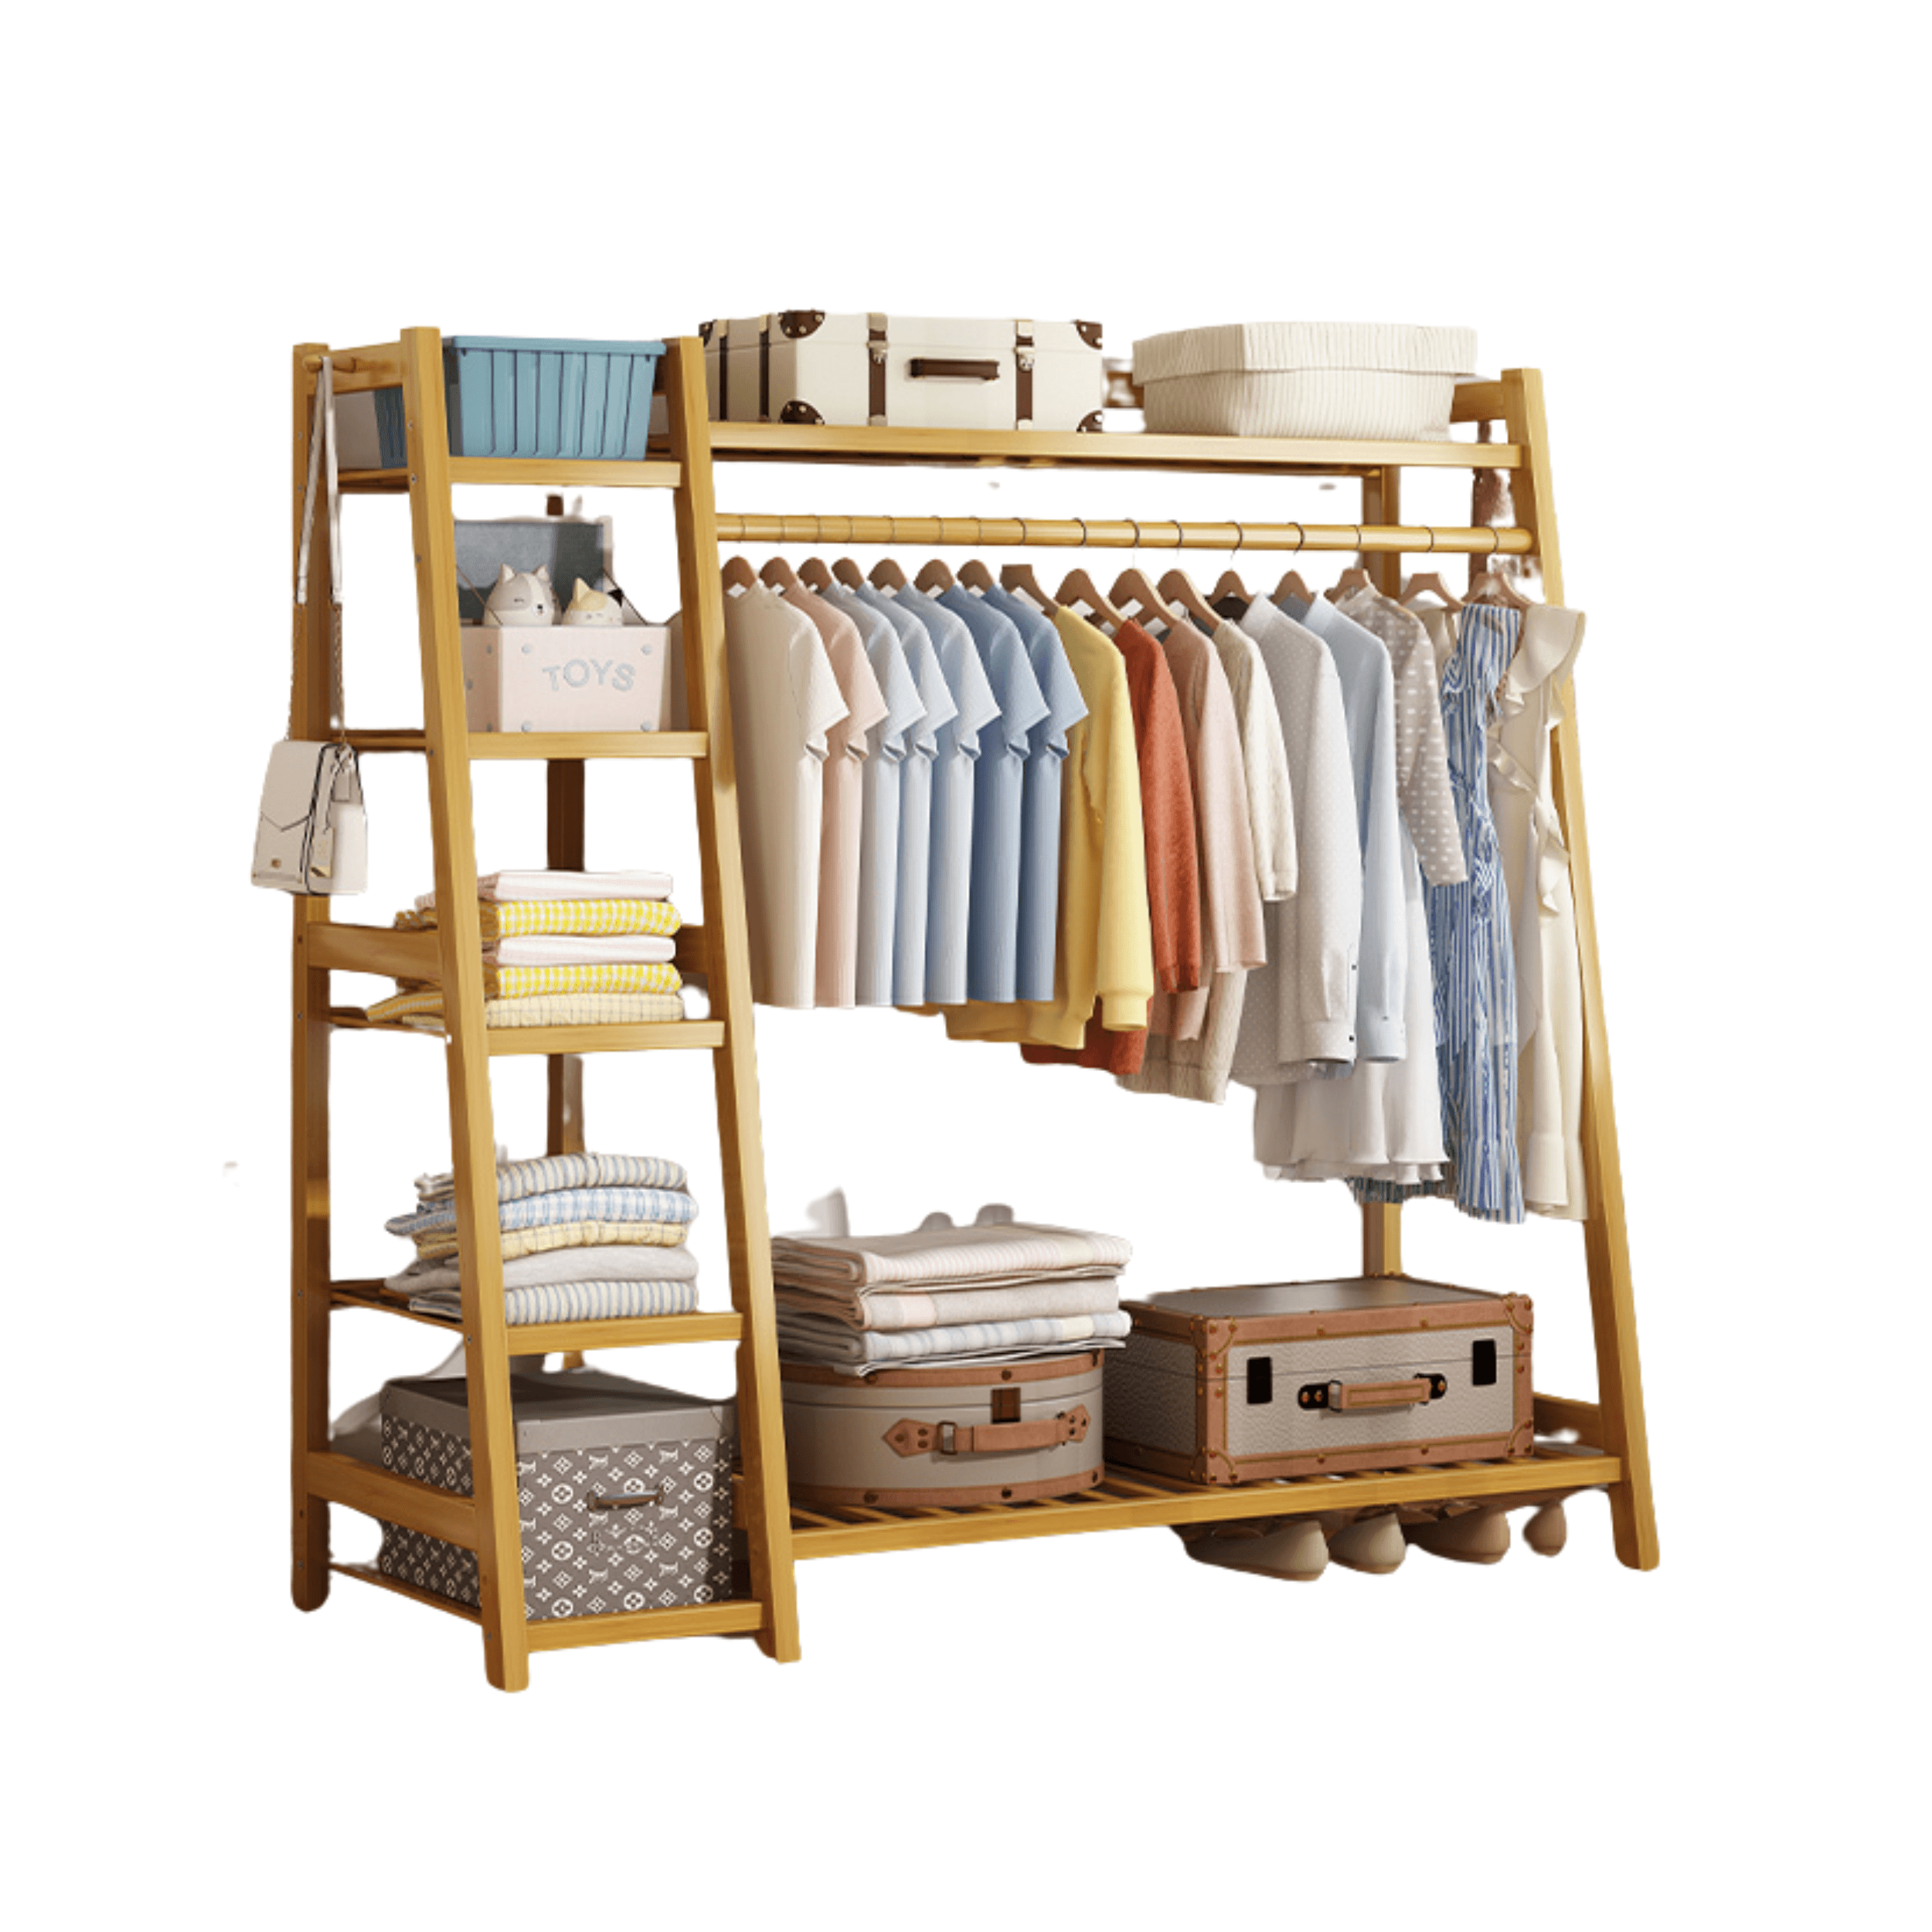 Bamboo clothes rack with 5 shelves - length 130 cm